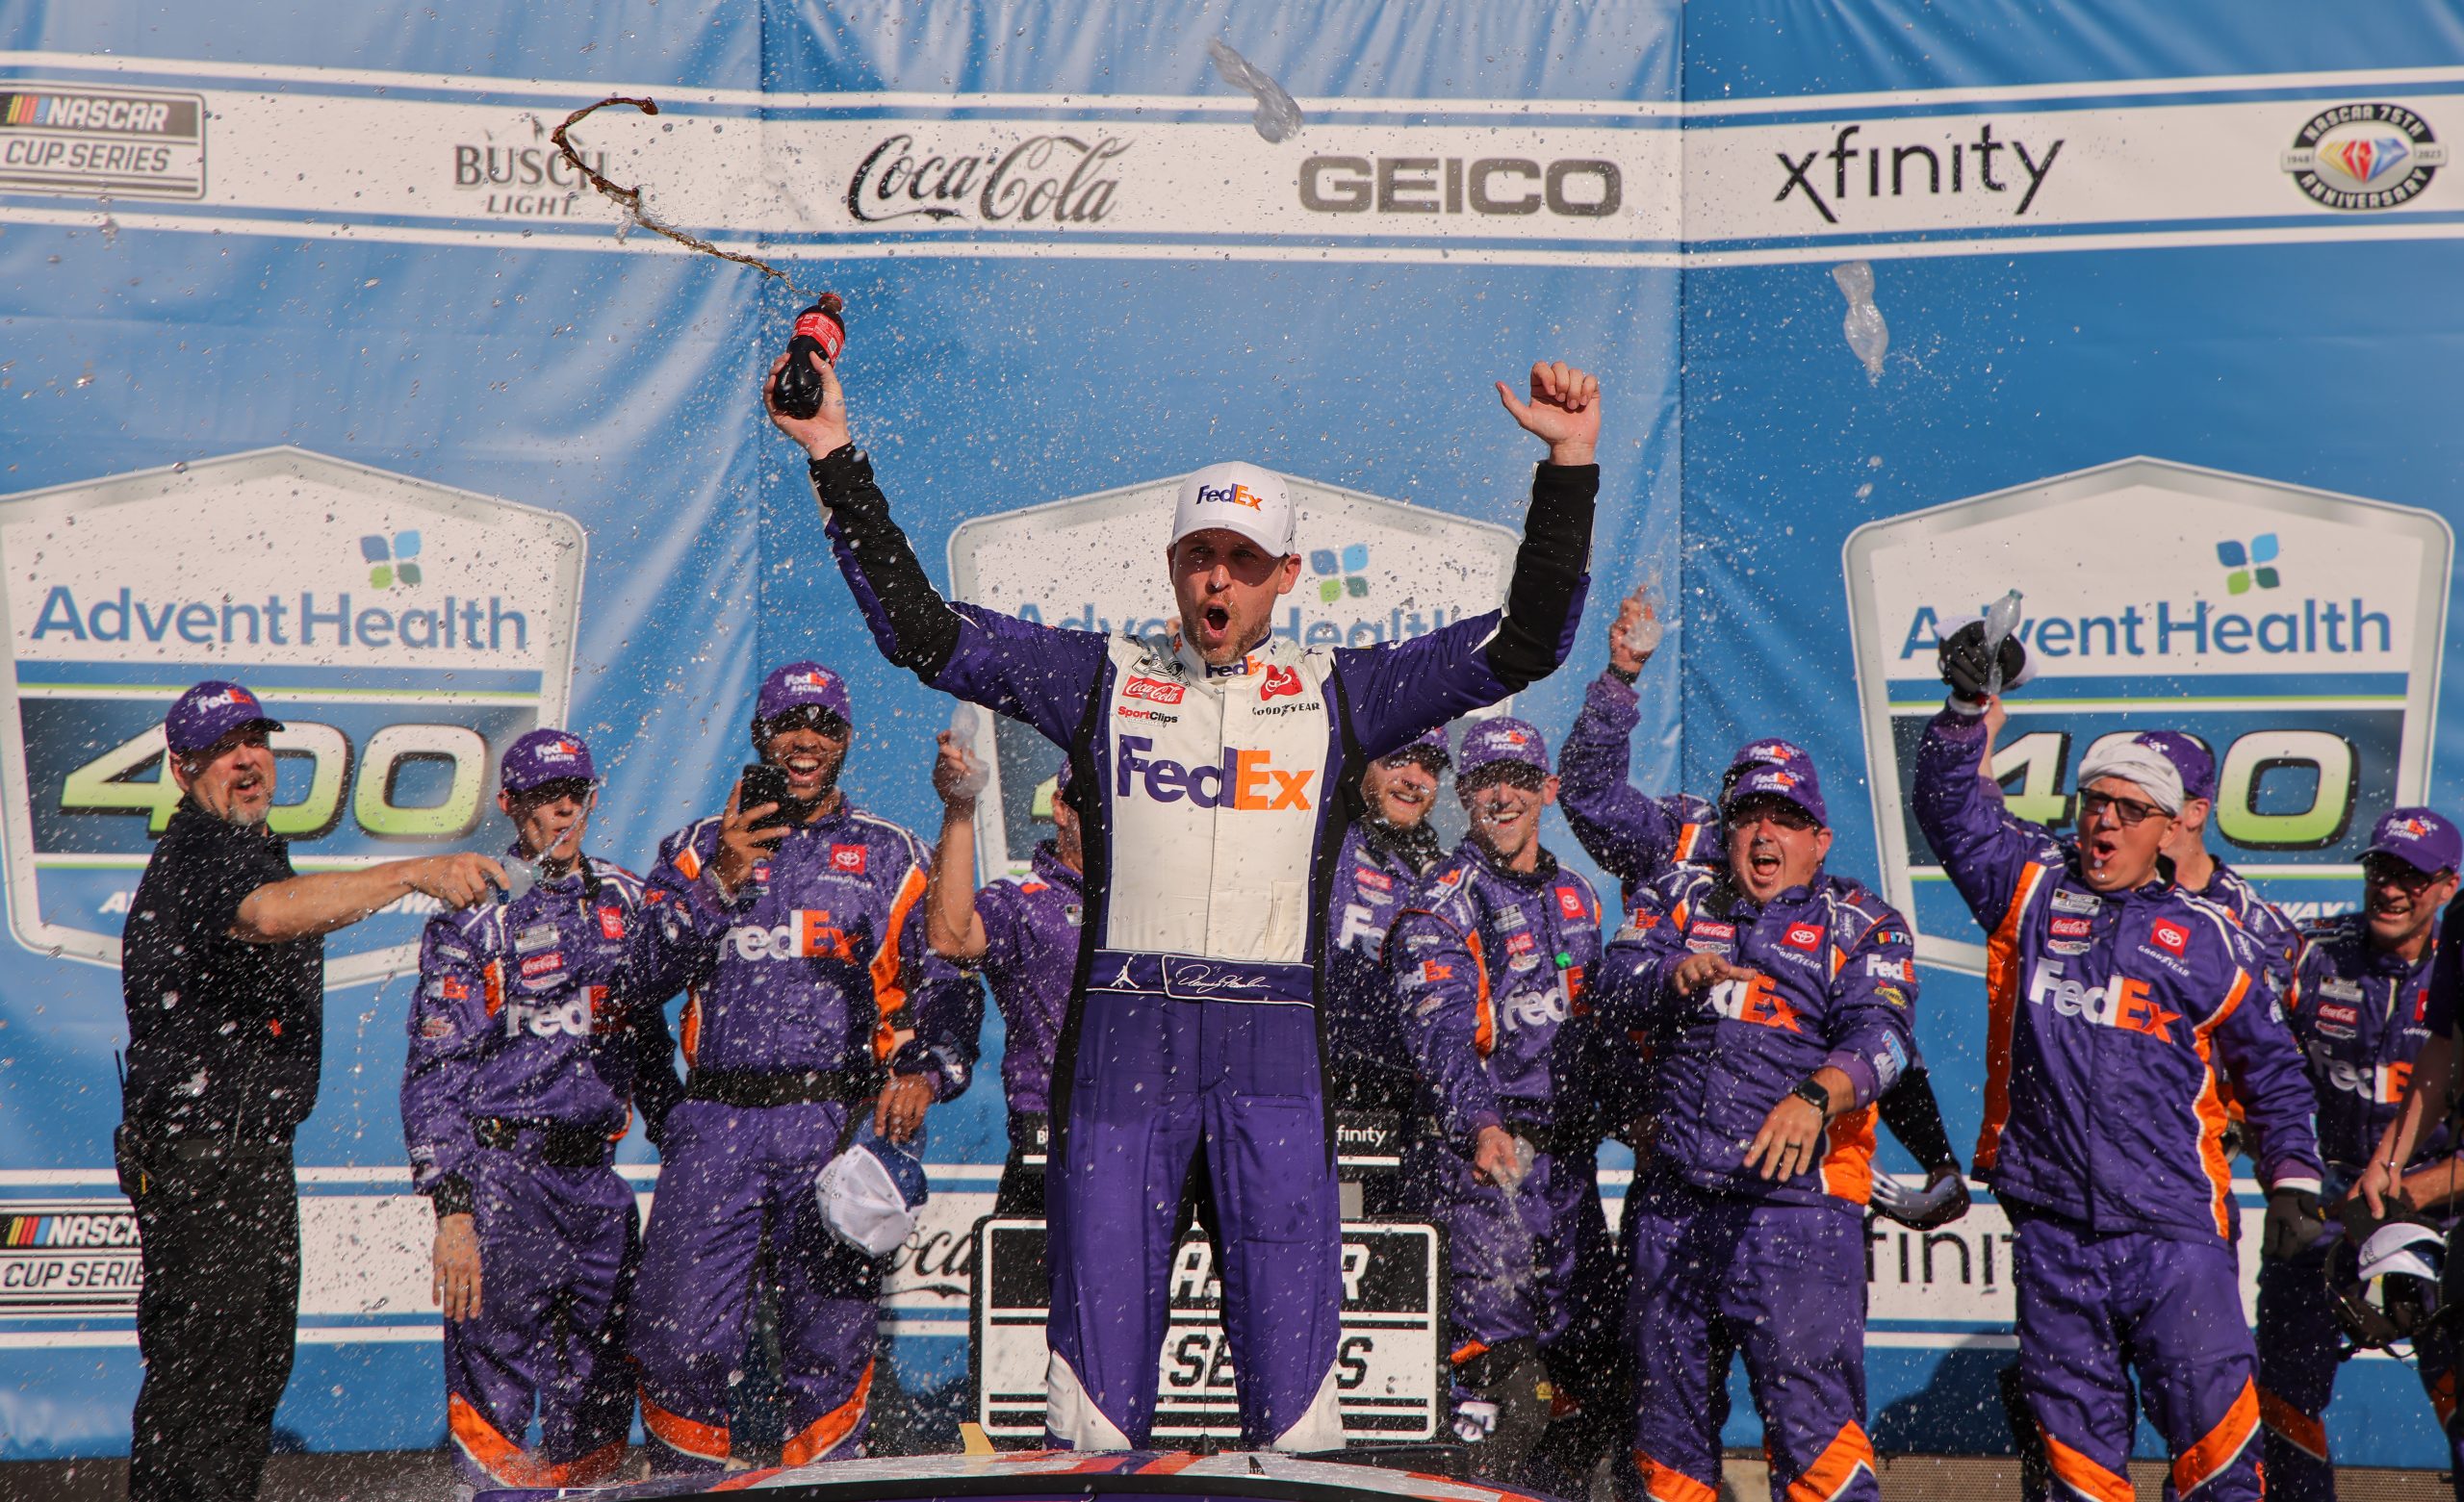 KANSAS CITY, KANSAS - MAY 07: Denny Hamlin, driver of the #11 FedEx Express Toyota, celebrates in victory lane after winning the NASCAR Cup Series Advent Health 400 at Kansas Speedway on May 07, 2023 in Kansas City, Kansas. (Photo by Jonathan Bachman/Getty Images)